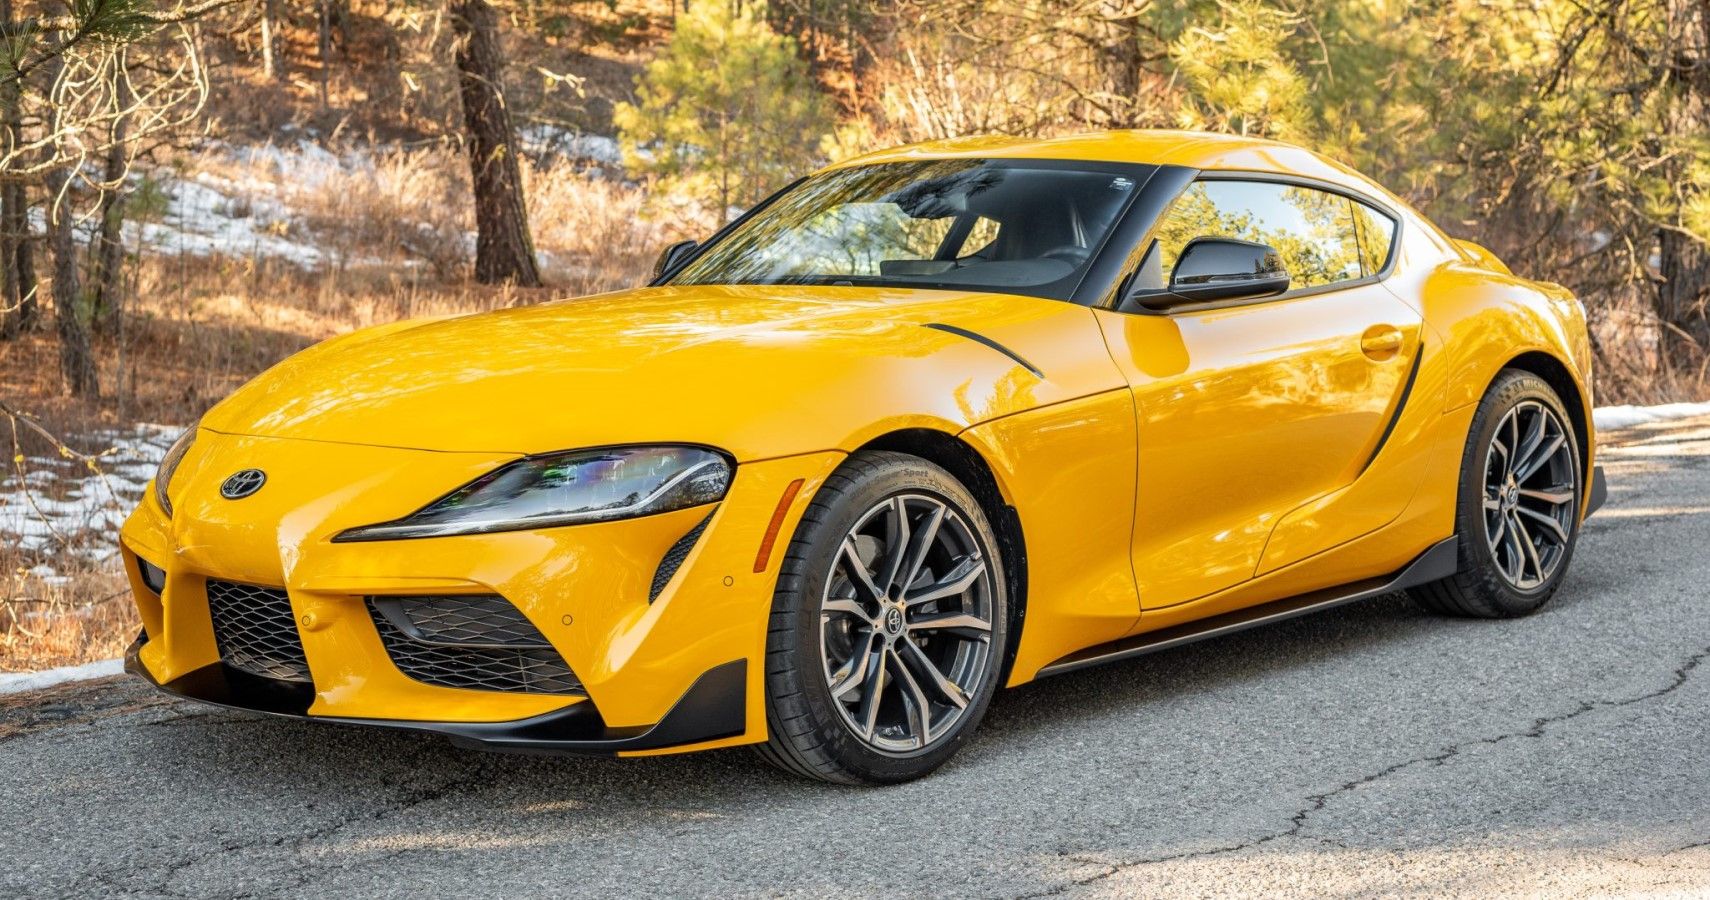 2020 Toyota Supra in yellow front third quarter view